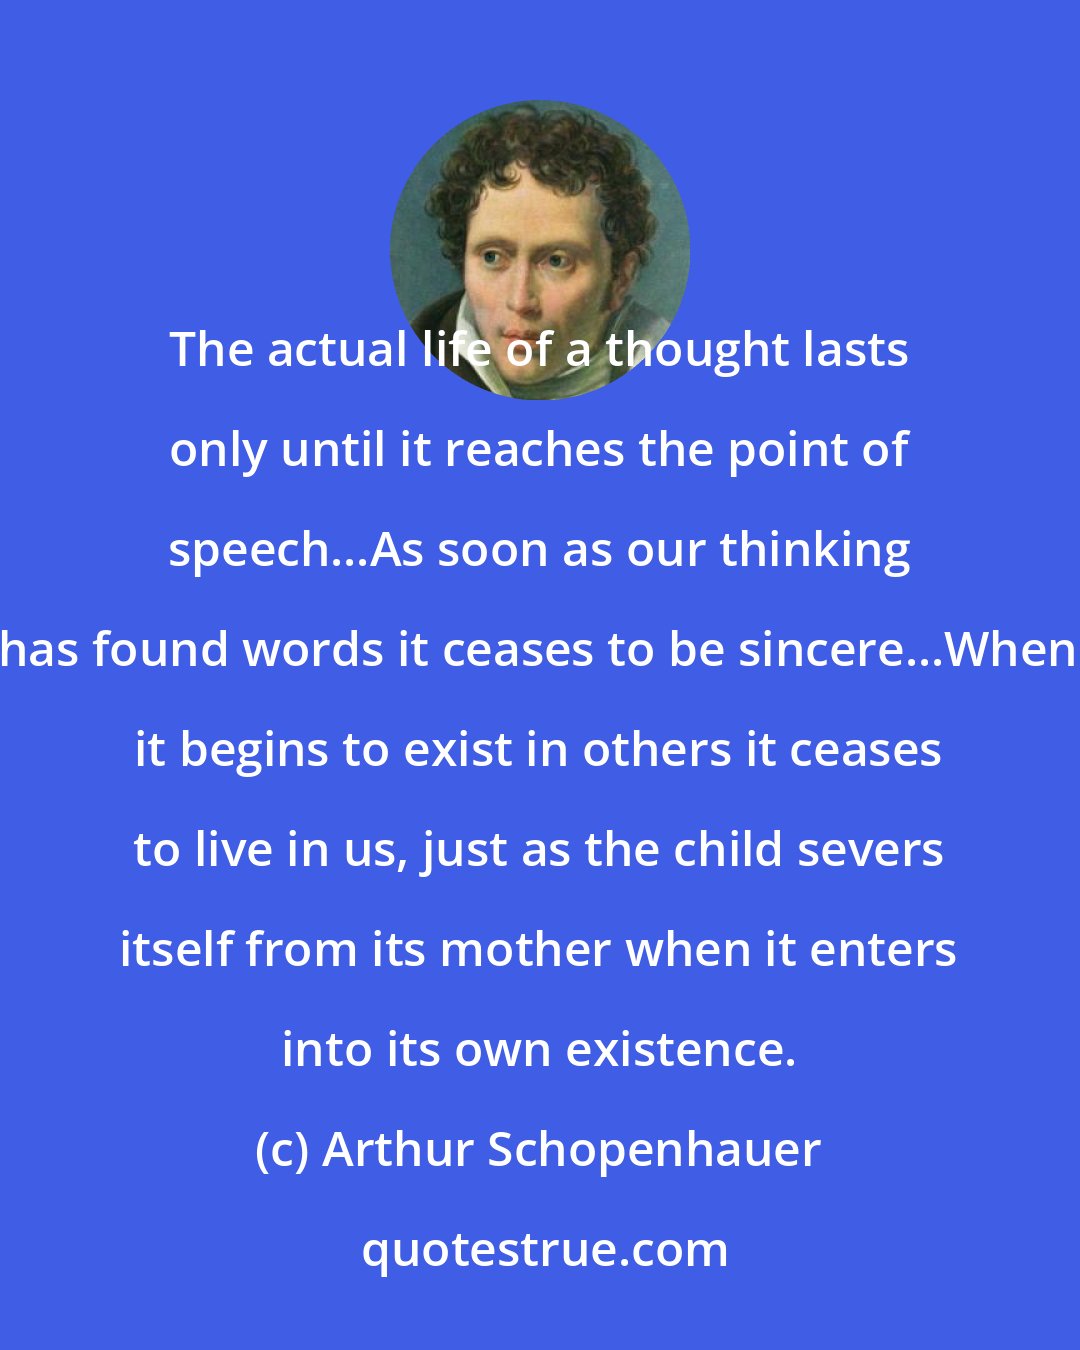 Arthur Schopenhauer: The actual life of a thought lasts only until it reaches the point of speech...As soon as our thinking has found words it ceases to be sincere...When it begins to exist in others it ceases to live in us, just as the child severs itself from its mother when it enters into its own existence.